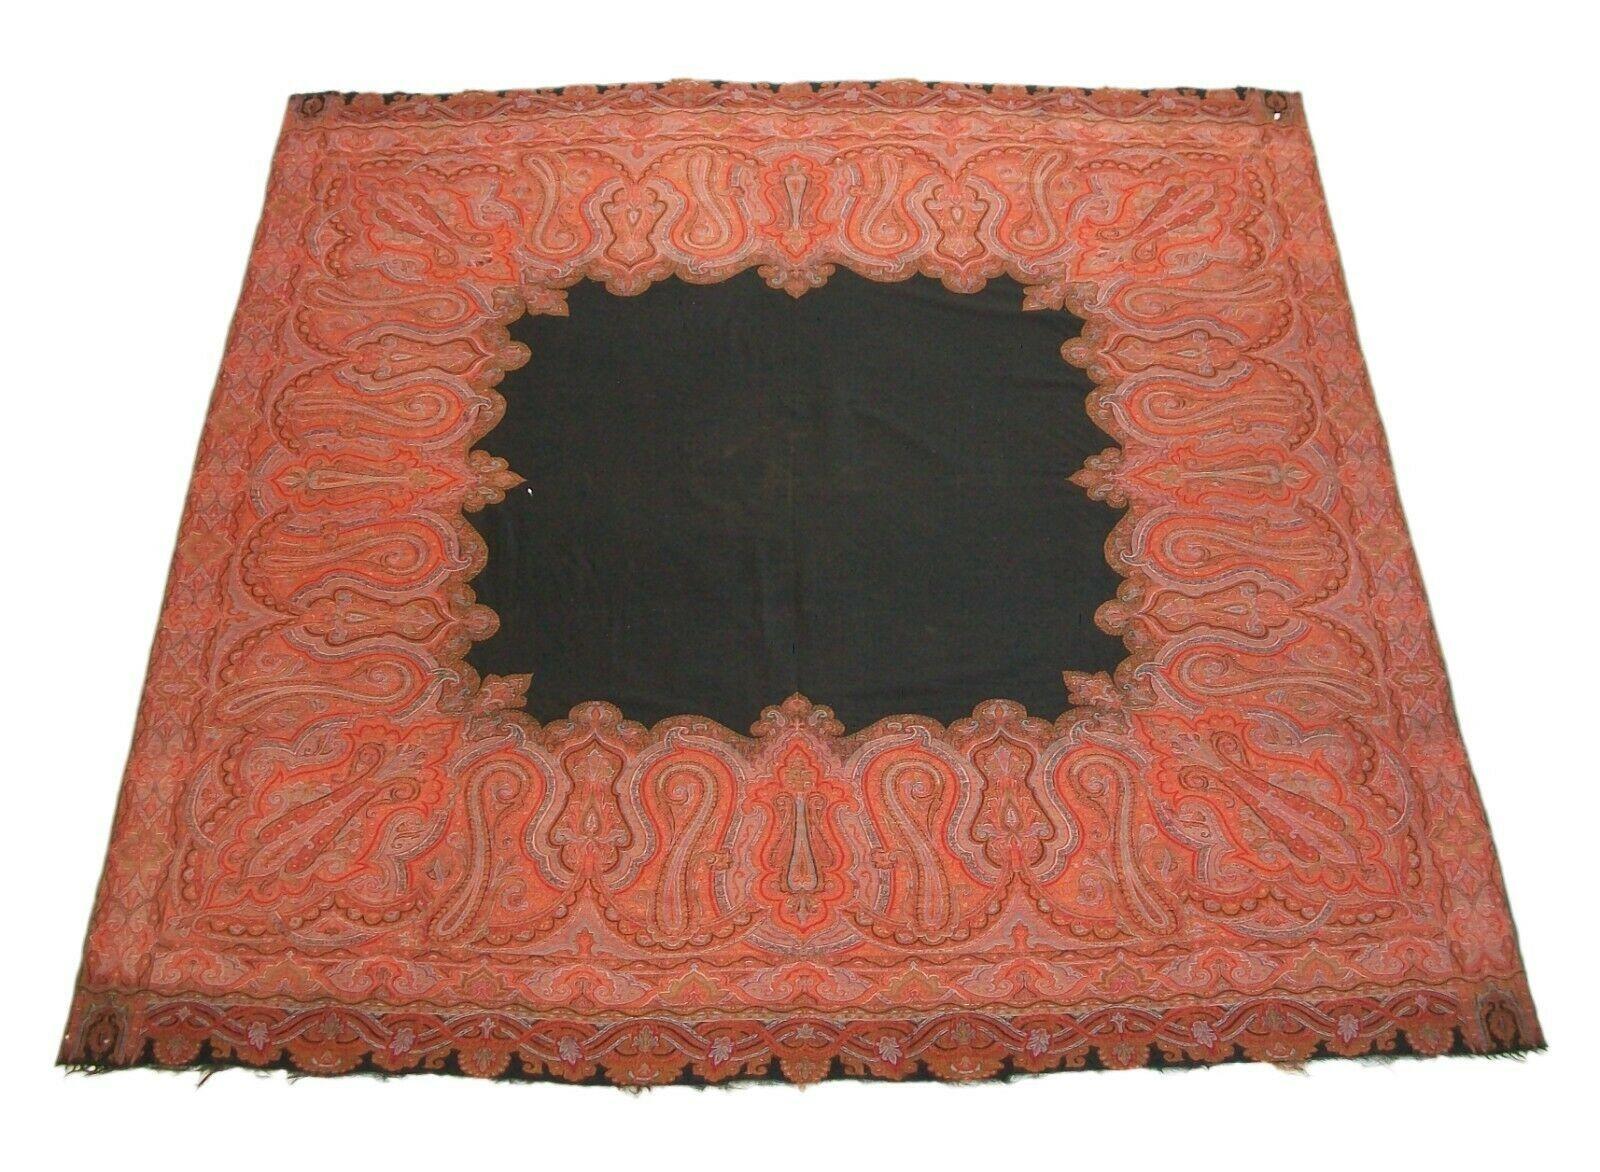 Antique Victorian paisley shawl - fine hand woven pattern with solid black center - fine black fringe to two ends - self woven edges on the other sides - unsigned - circa 1850's.

Good antique condition - a few holes scattered throughout (see